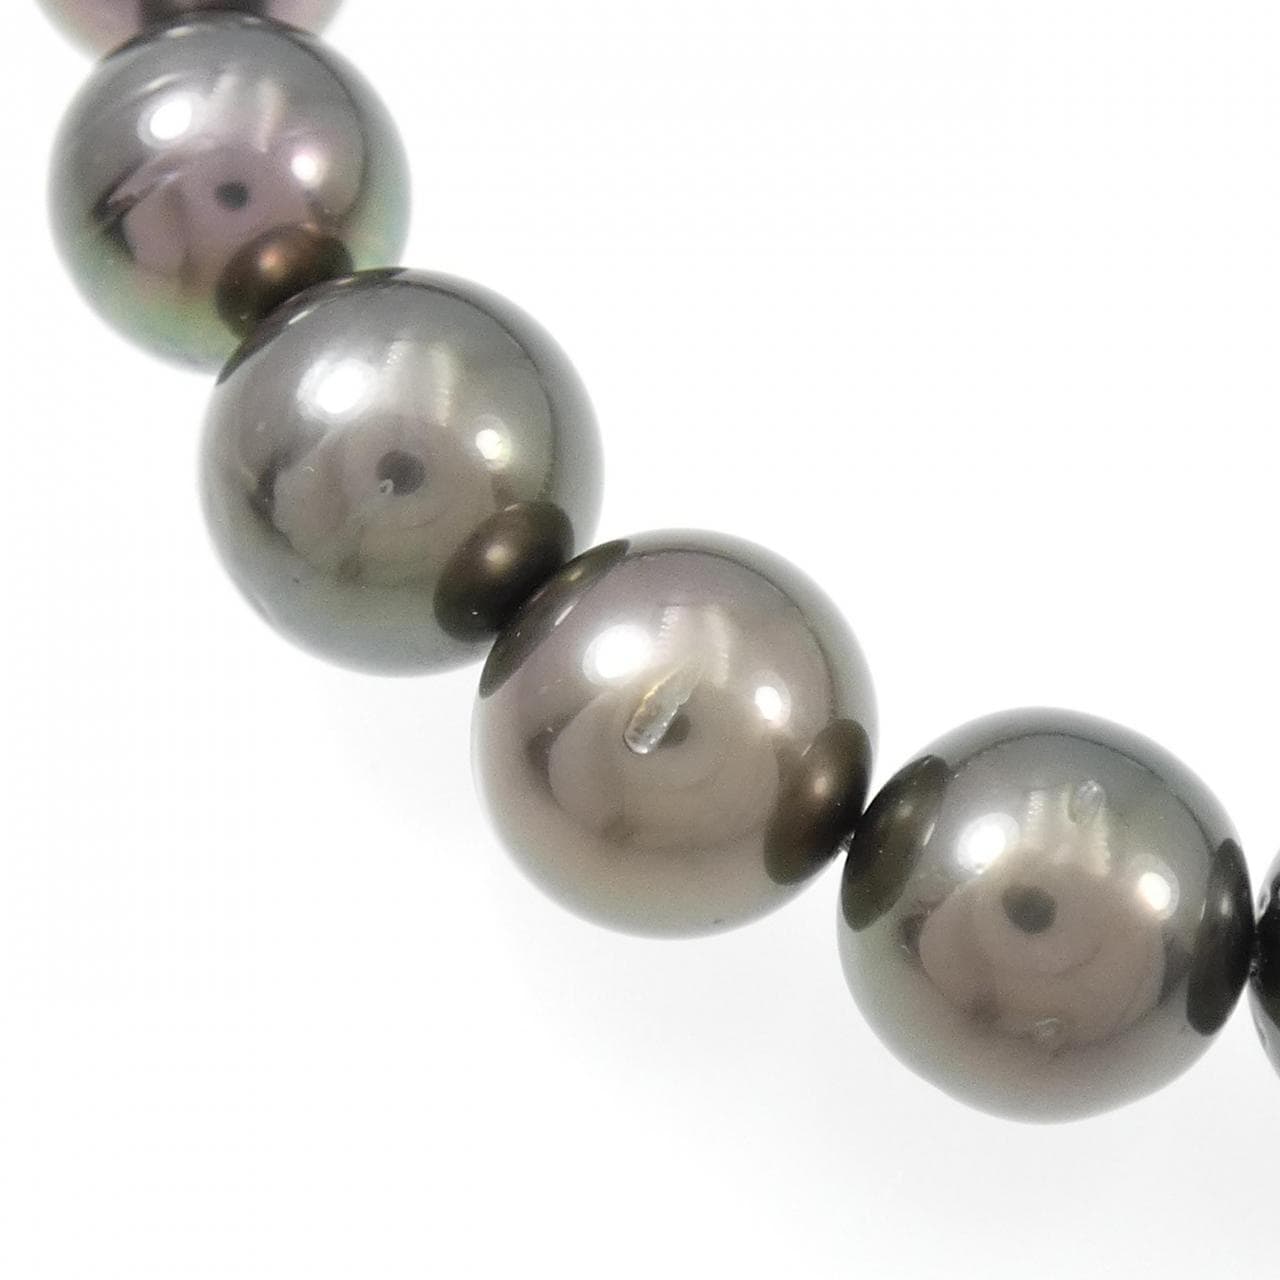 Silver clasp/K14WG black pearl necklace 8-11mm earring set